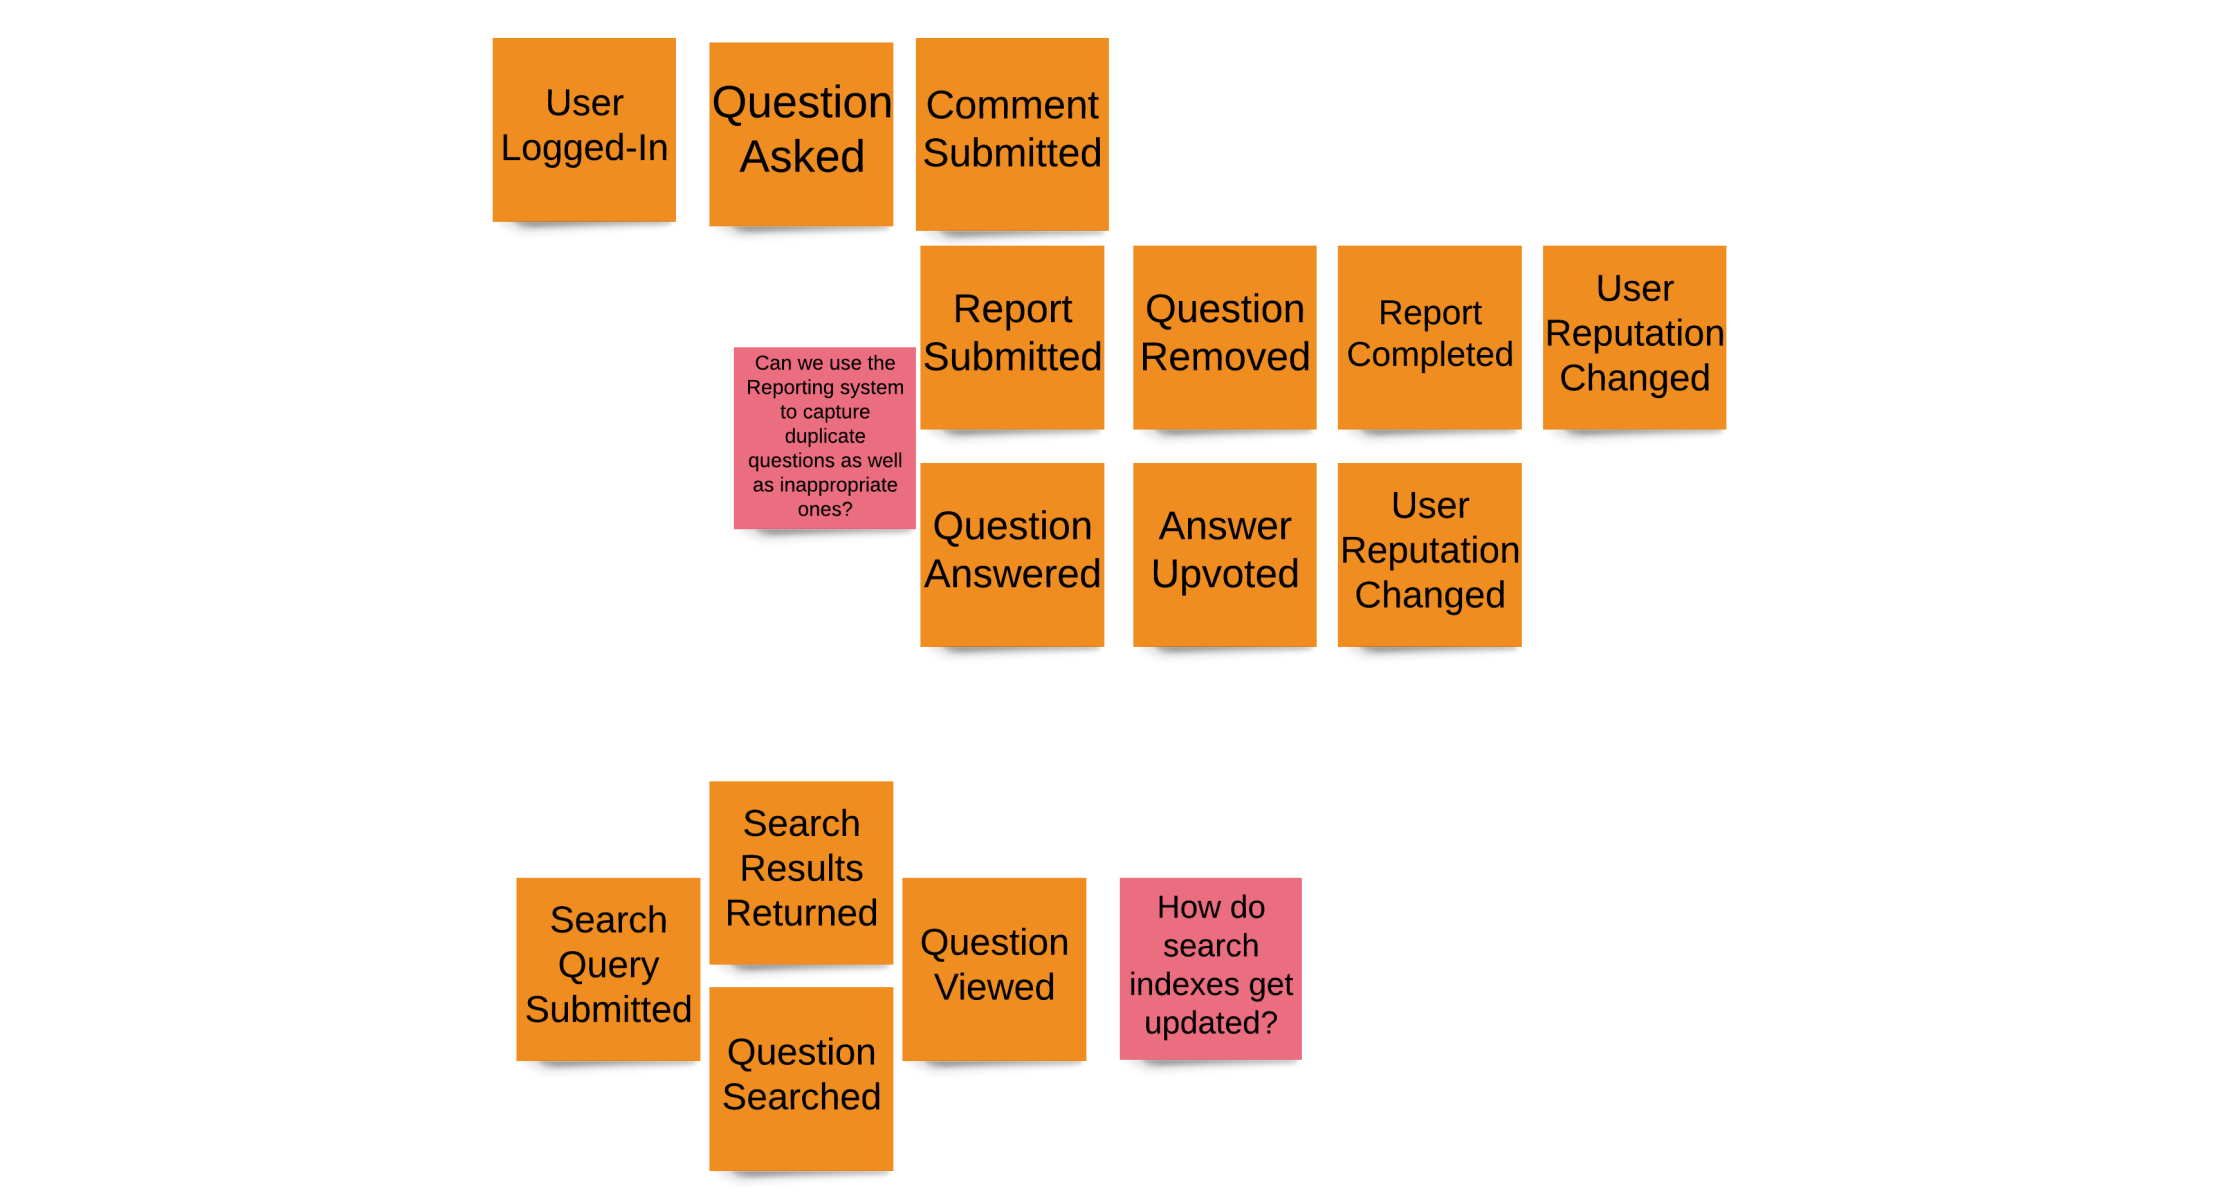 Event Storming - Q&A Domain Sample - Step 2 - Refine Events - 2231x1200.png